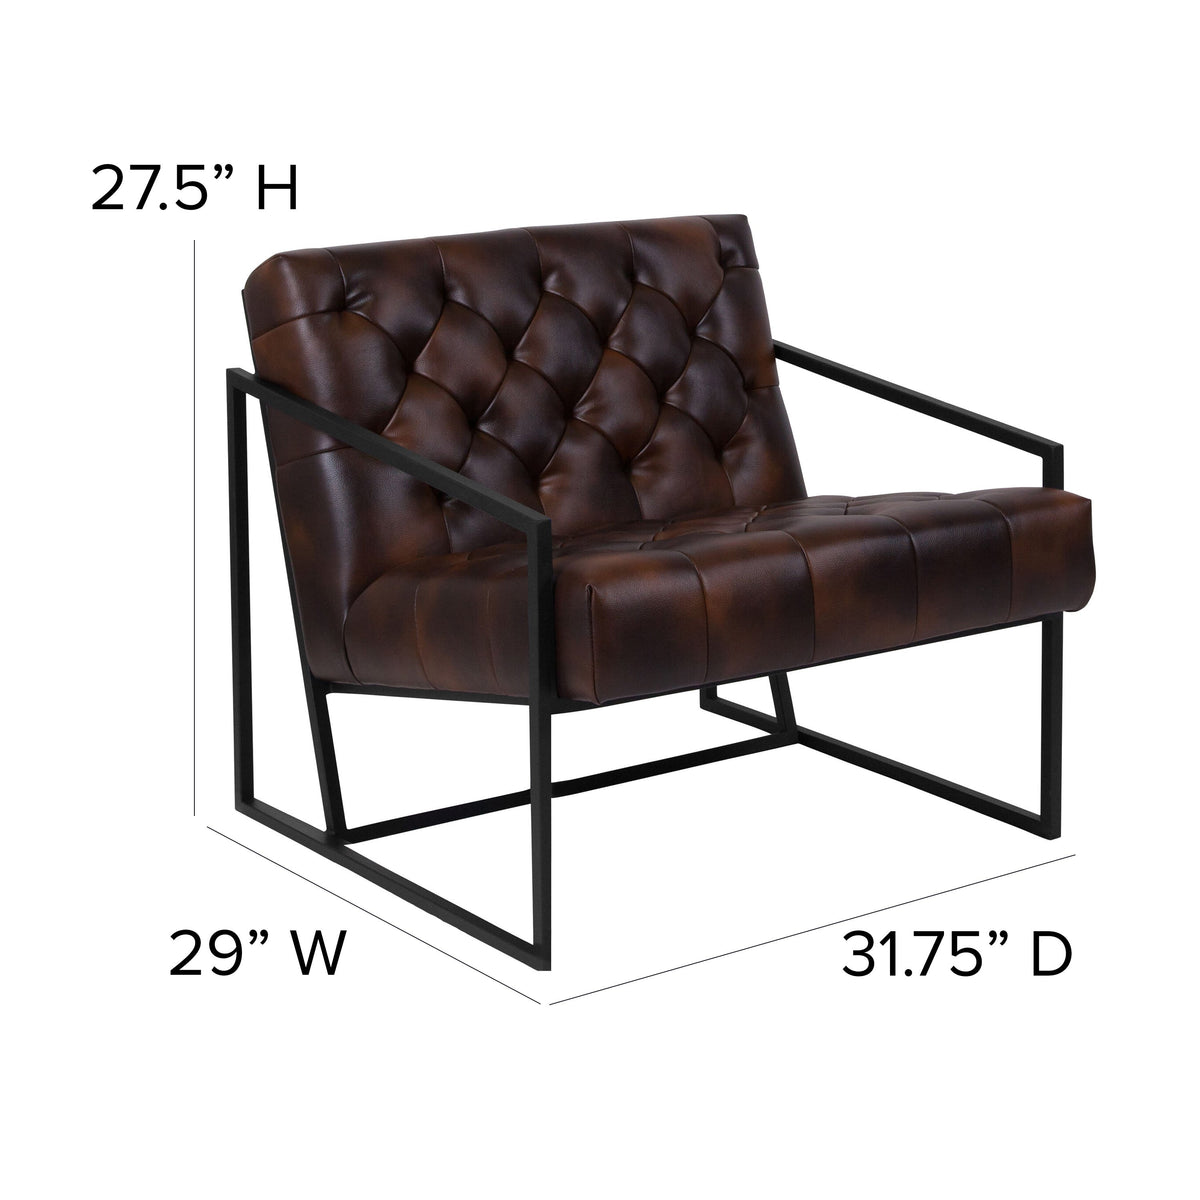 Bomber Jacket |#| Bomber Jacket LeatherSoft Tufted Lounge Chair w/ Integrated Frame & Slanted Arms